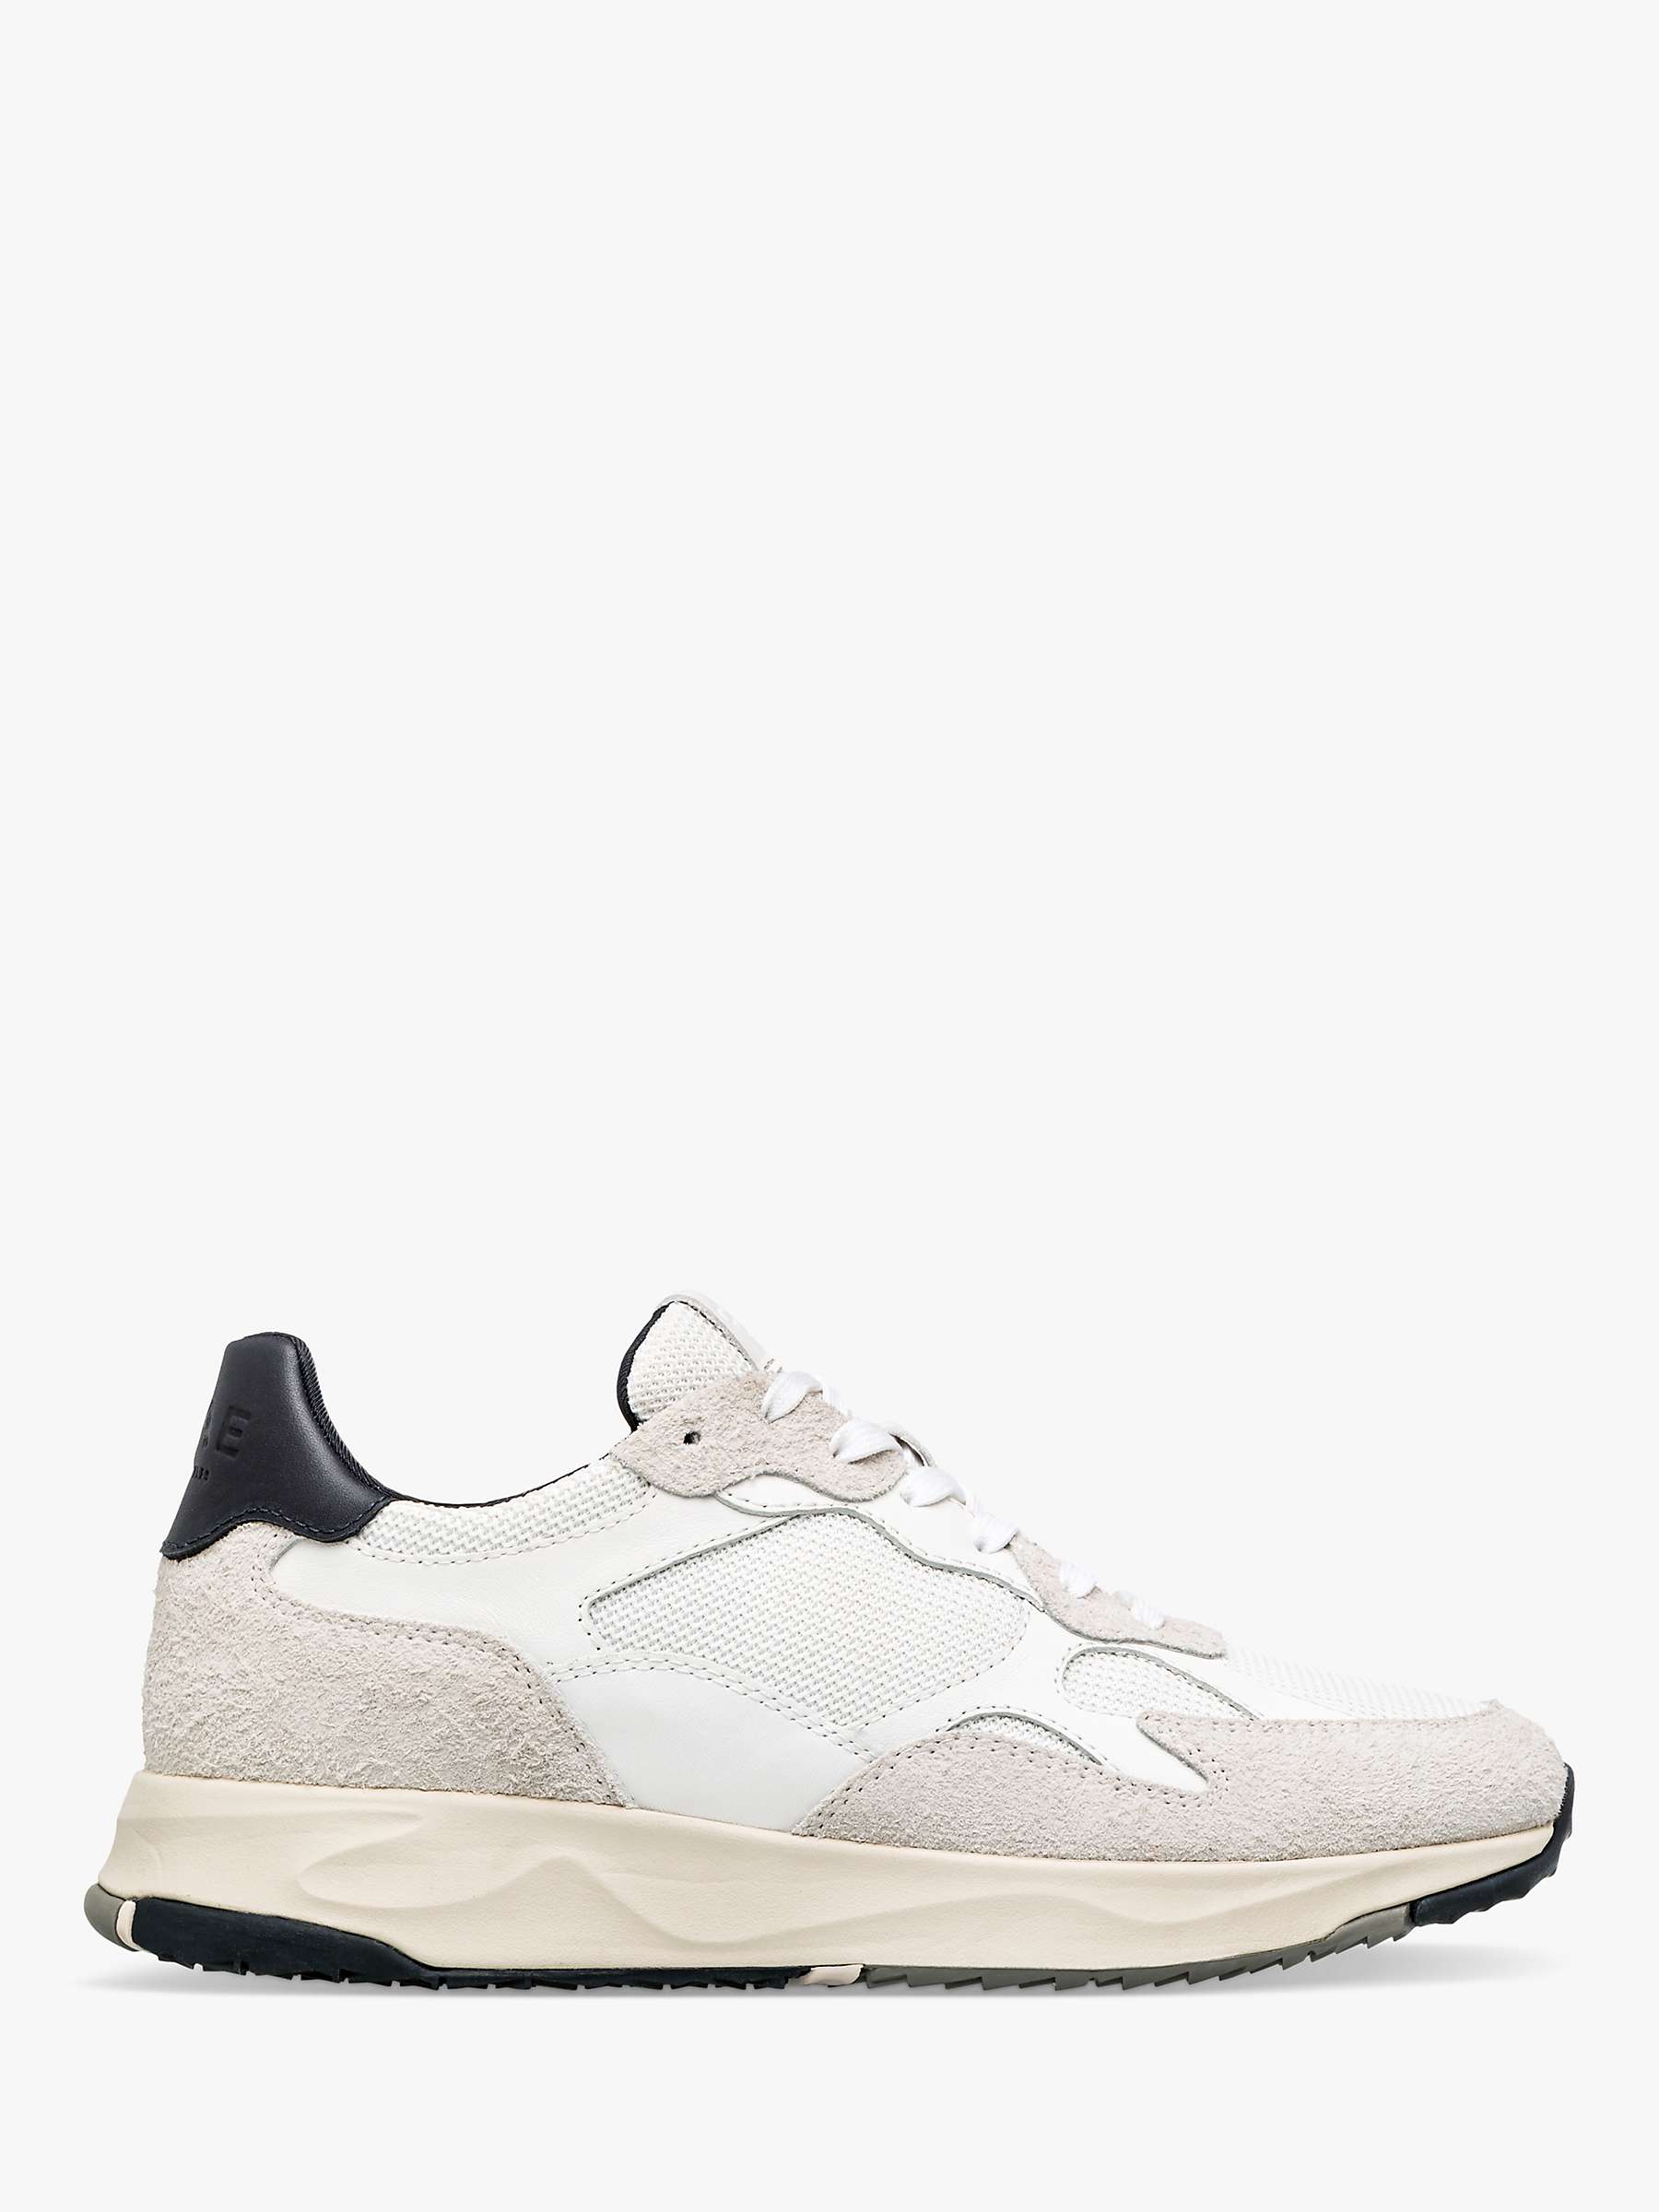 Buy CLAE Zuma Leather Lace Up Trainers, White/Navy Online at johnlewis.com